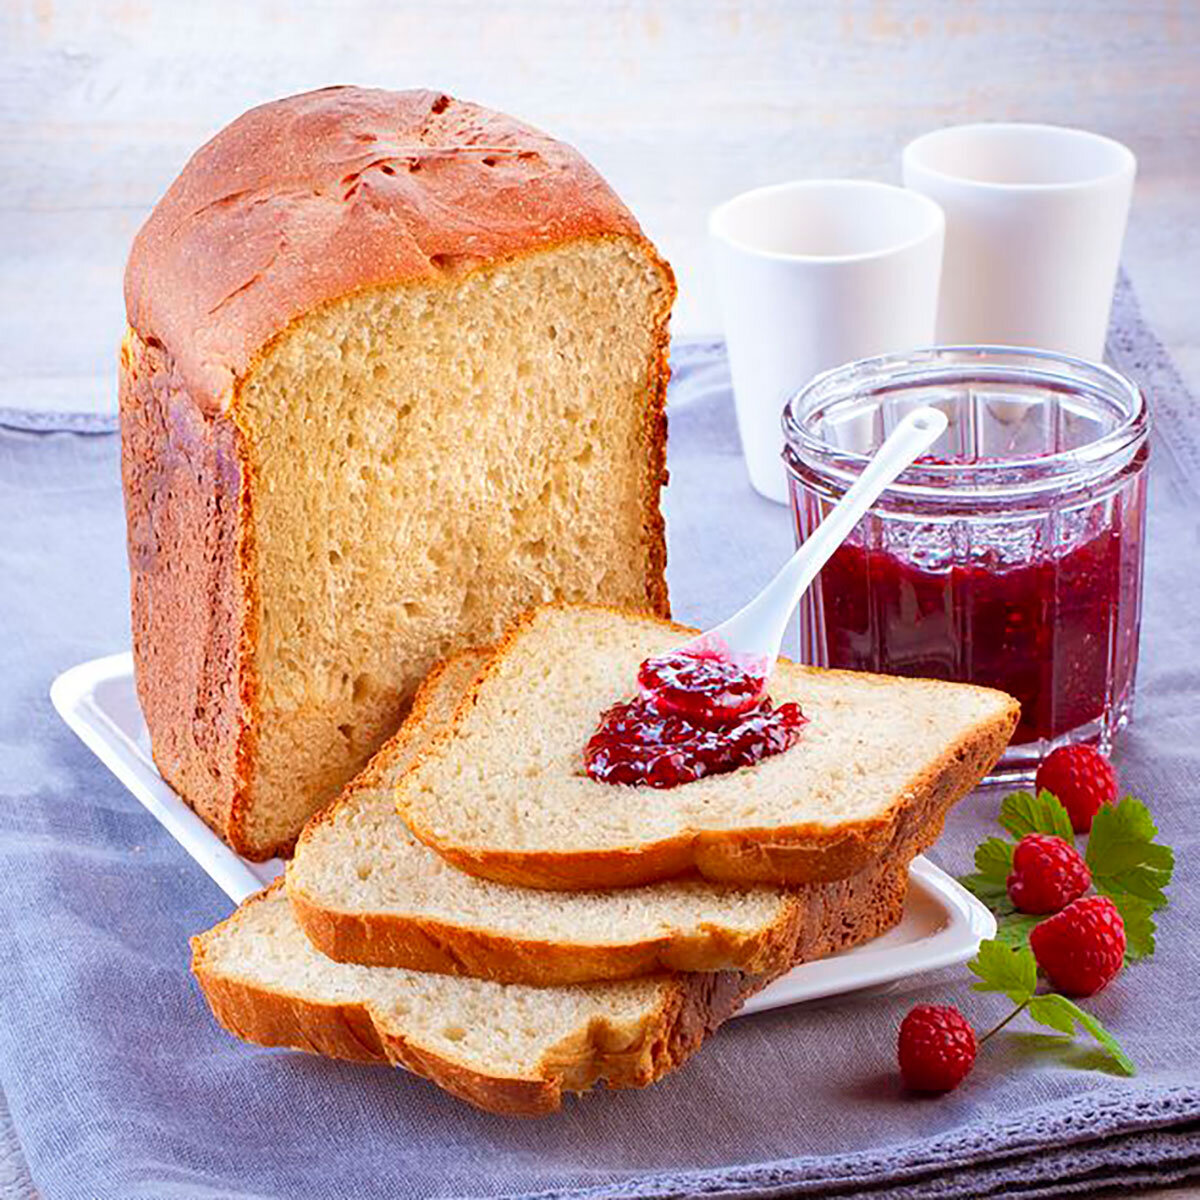 Image of Bread and Jam